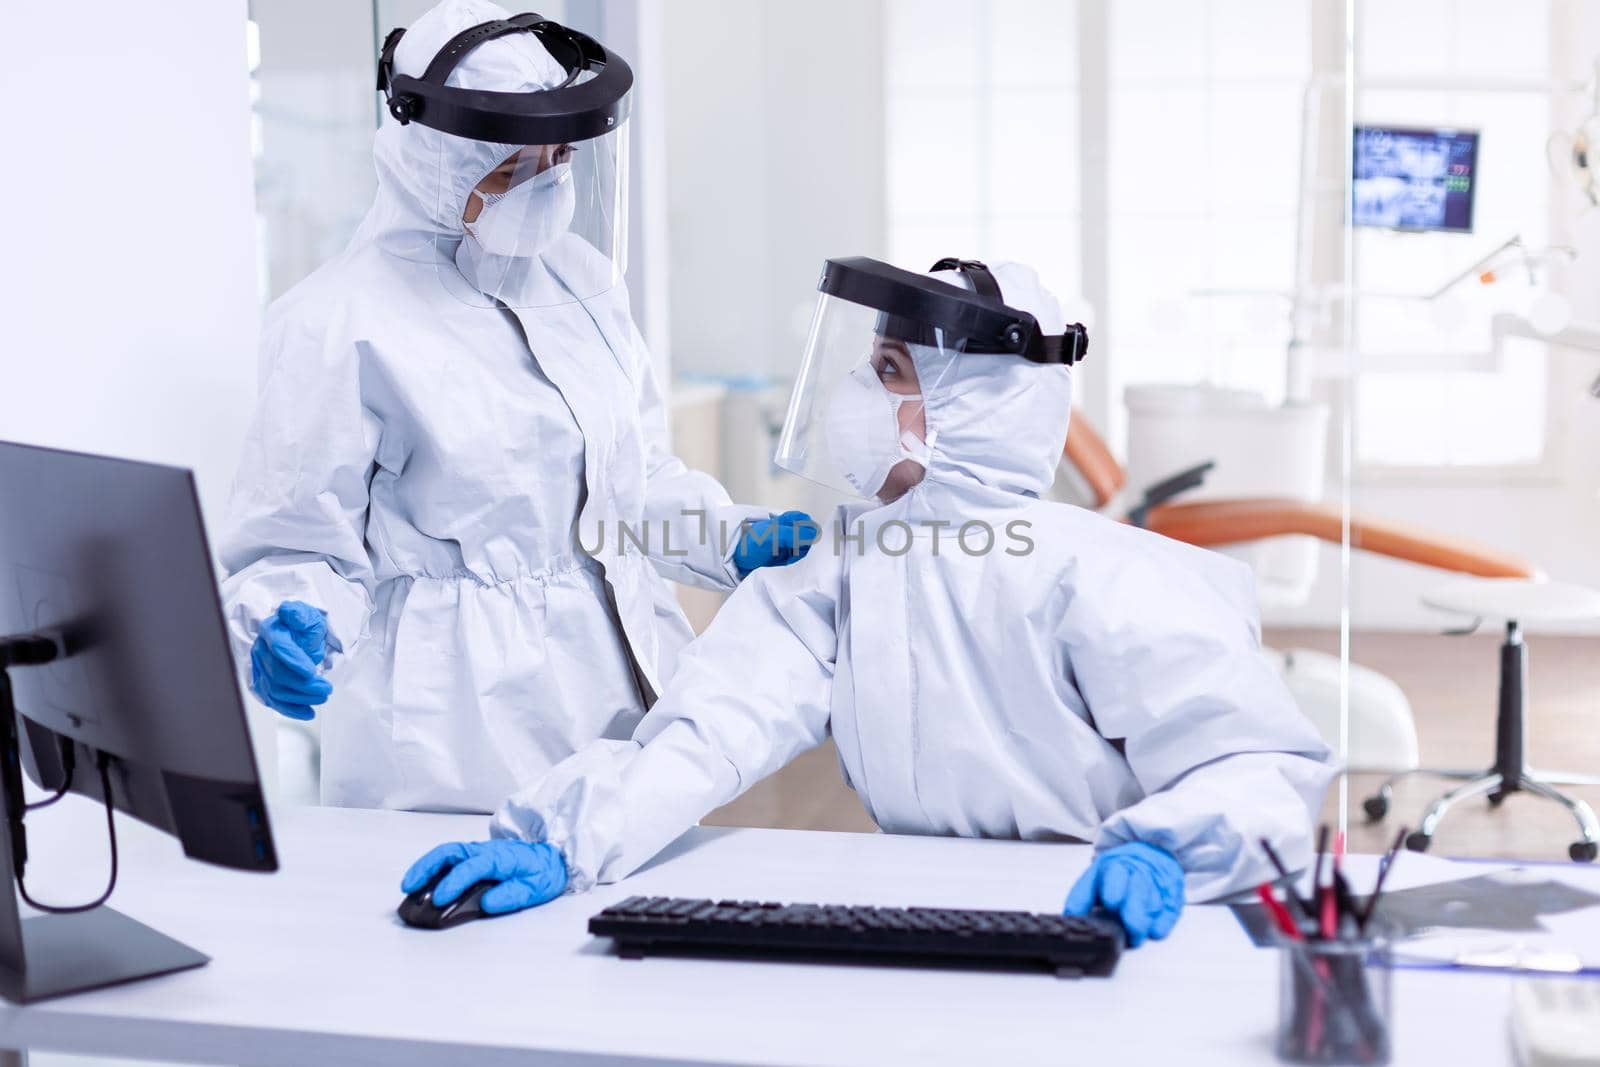 Women doctors in protective suit to fight pandemic with covid-19 by DCStudio